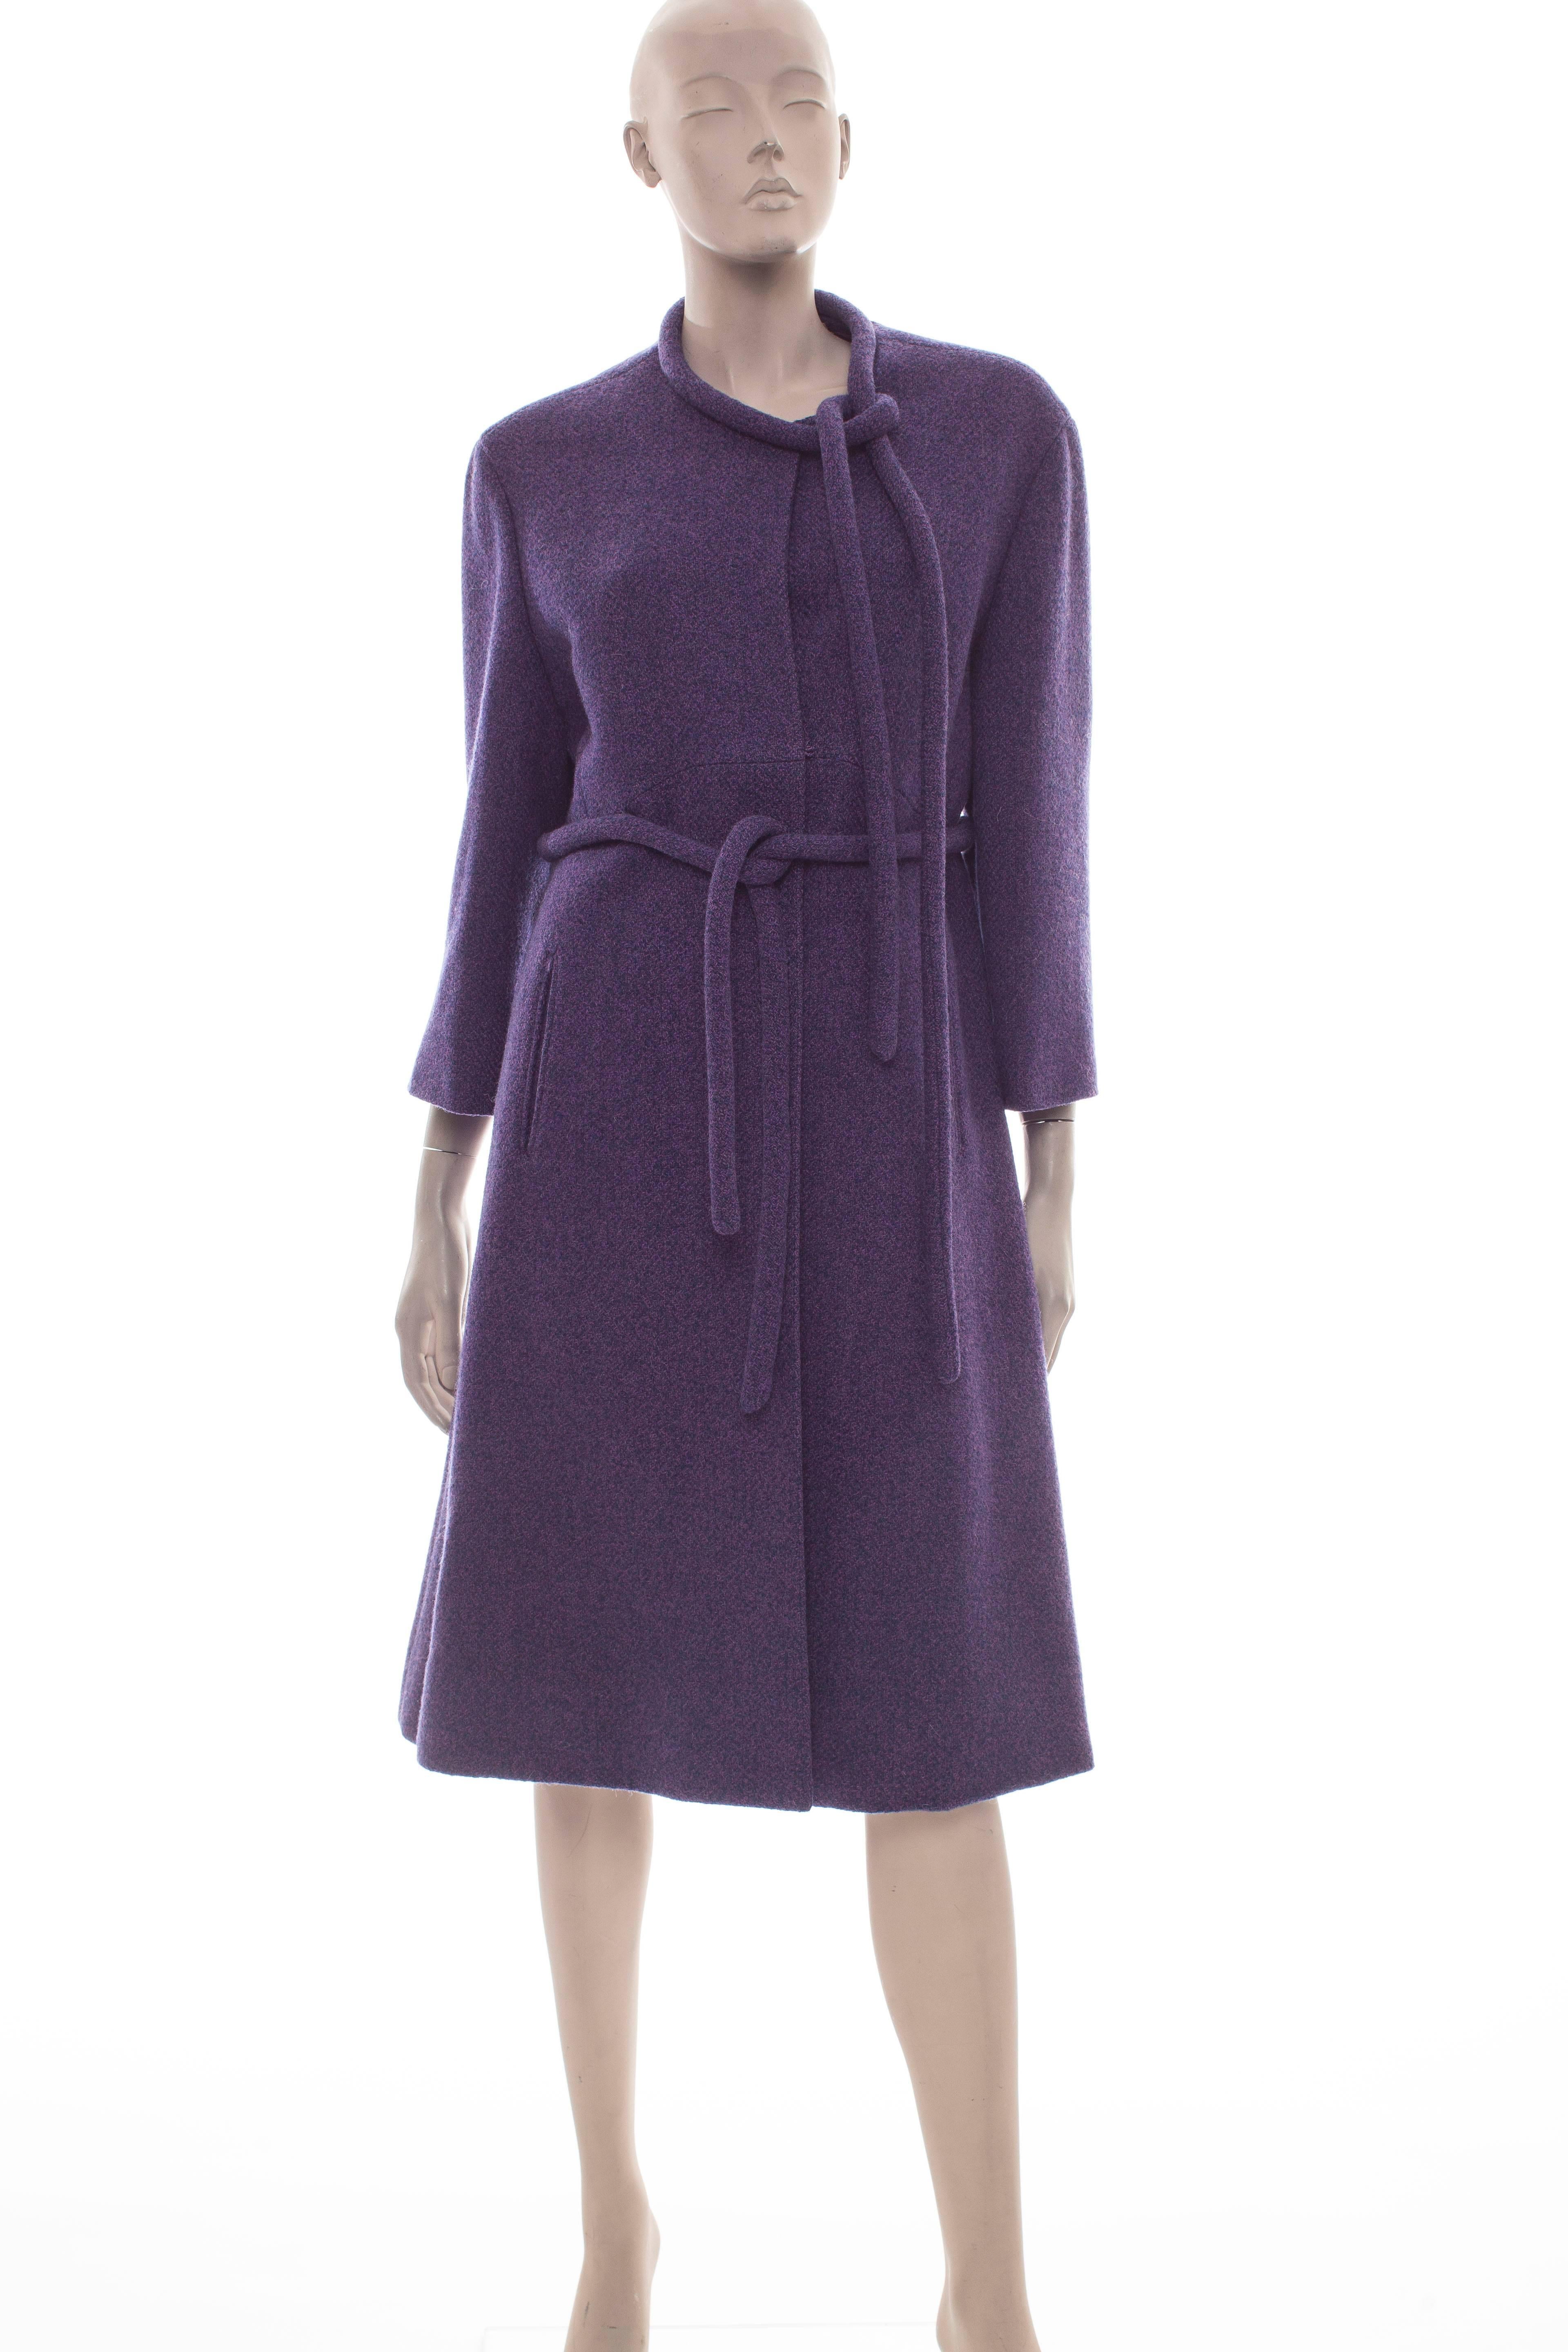 Jeanne Lanvin - Castillo, circa 1960's, A-line tweed coat, belted neck and waist, two front pockets and fully lined.